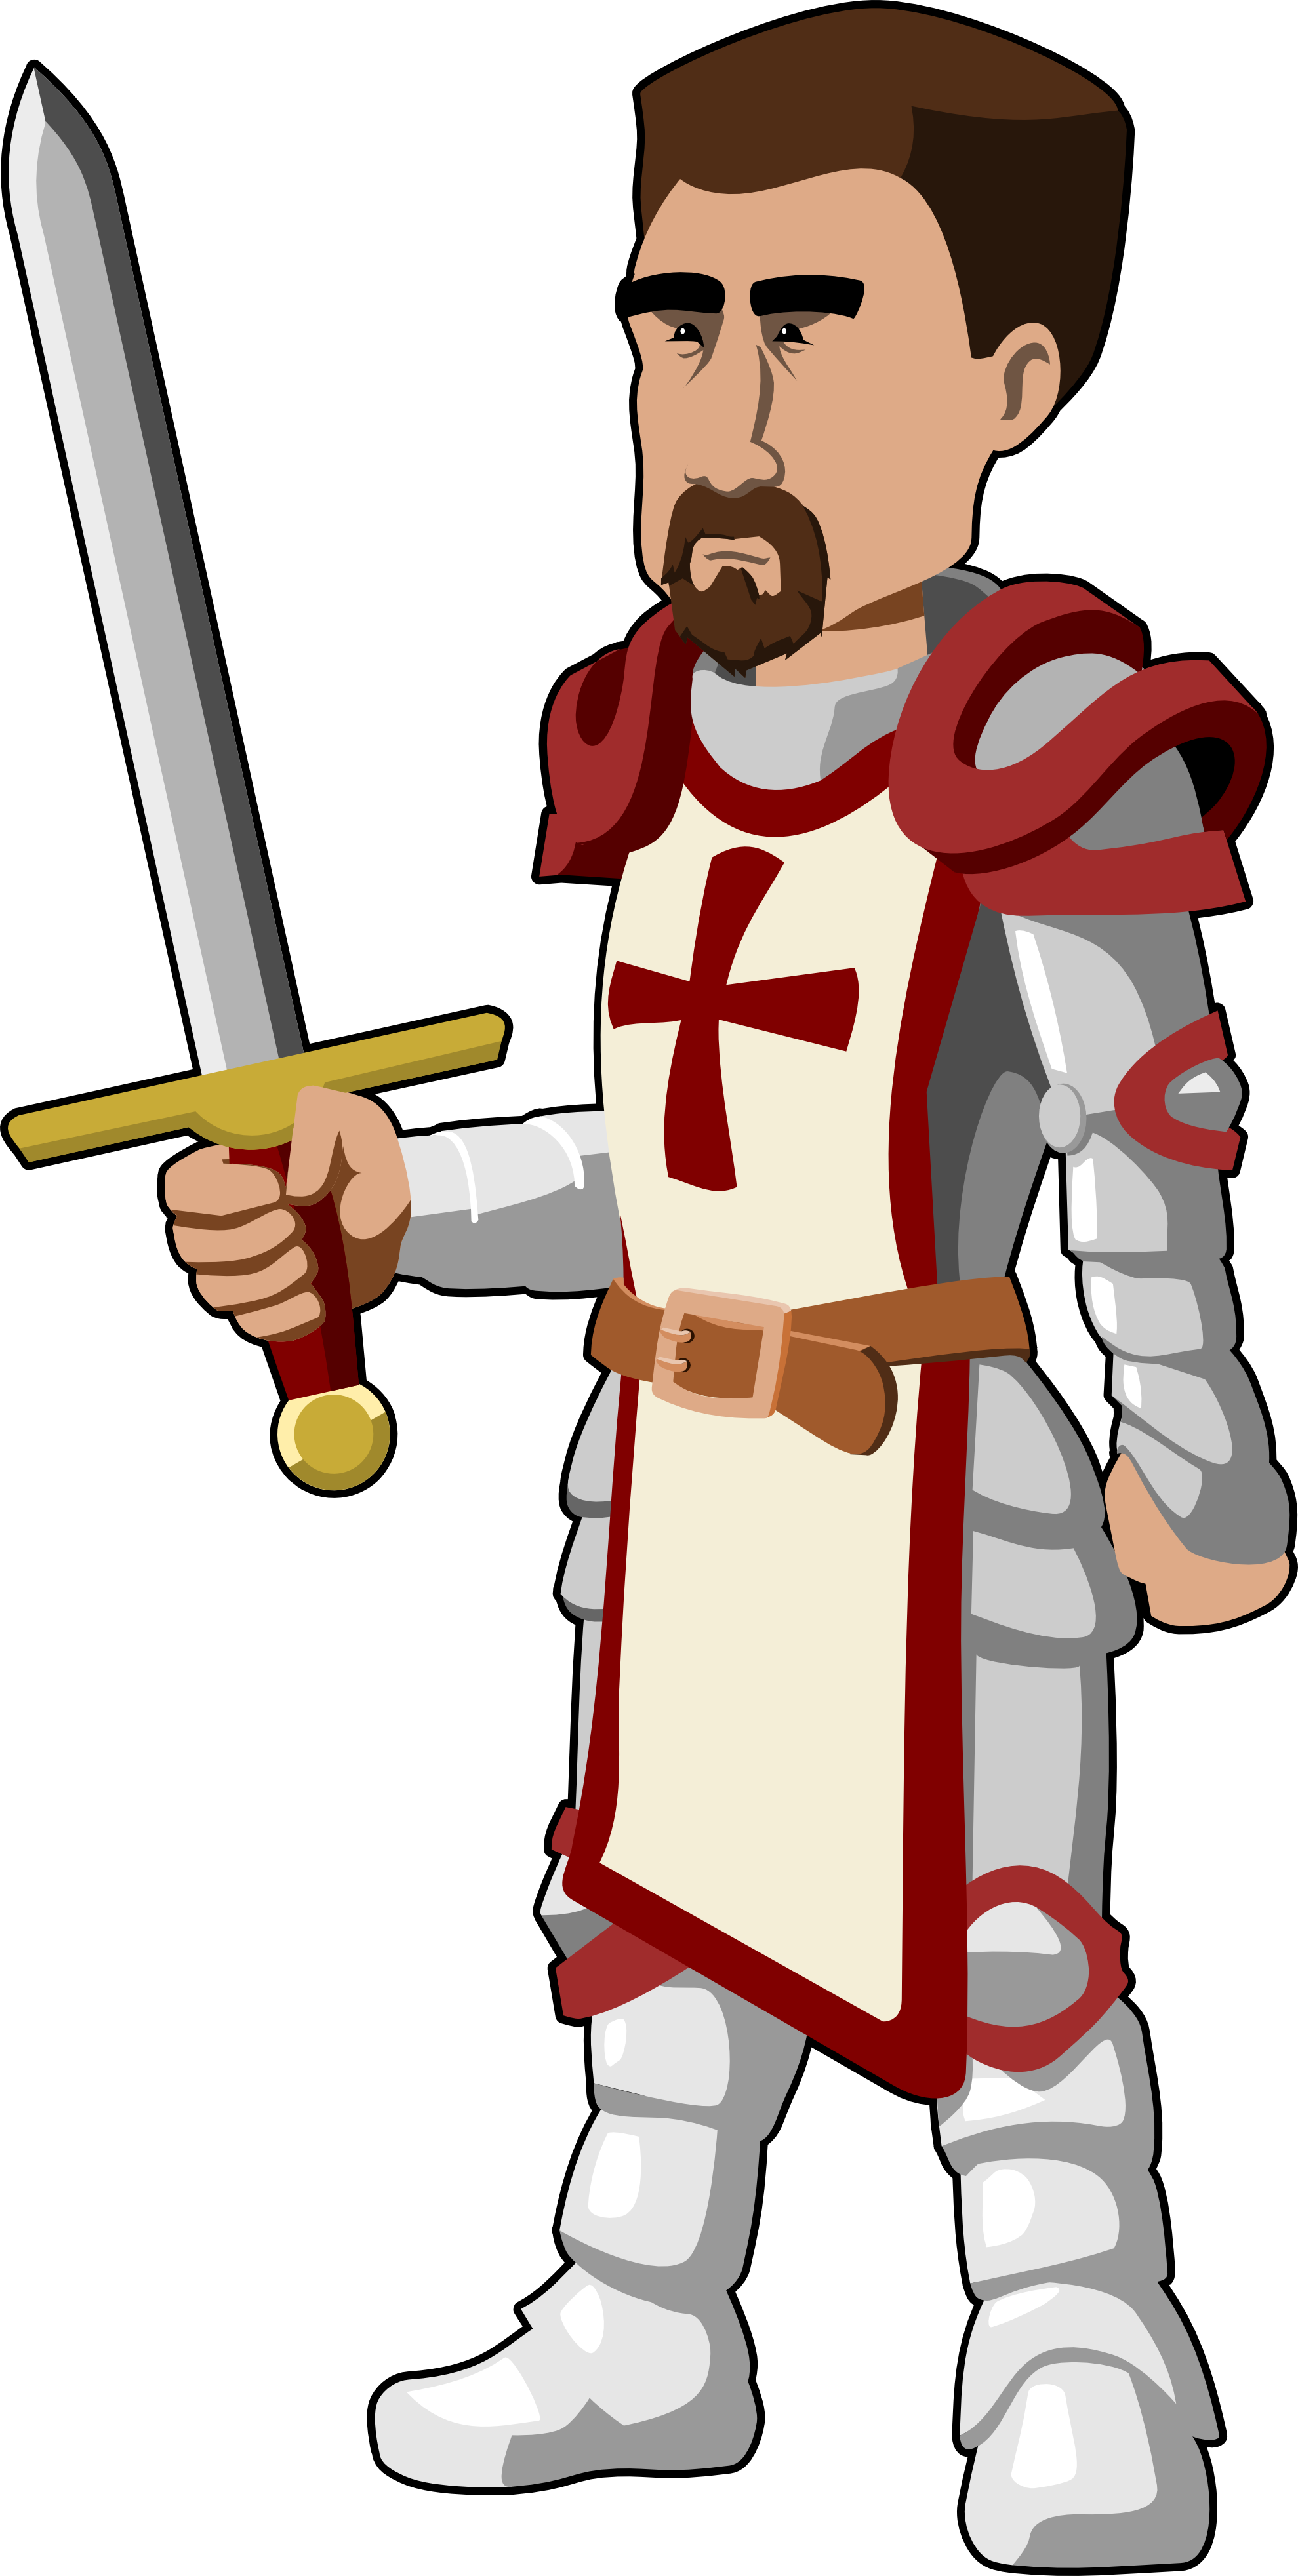 Knight medieval person